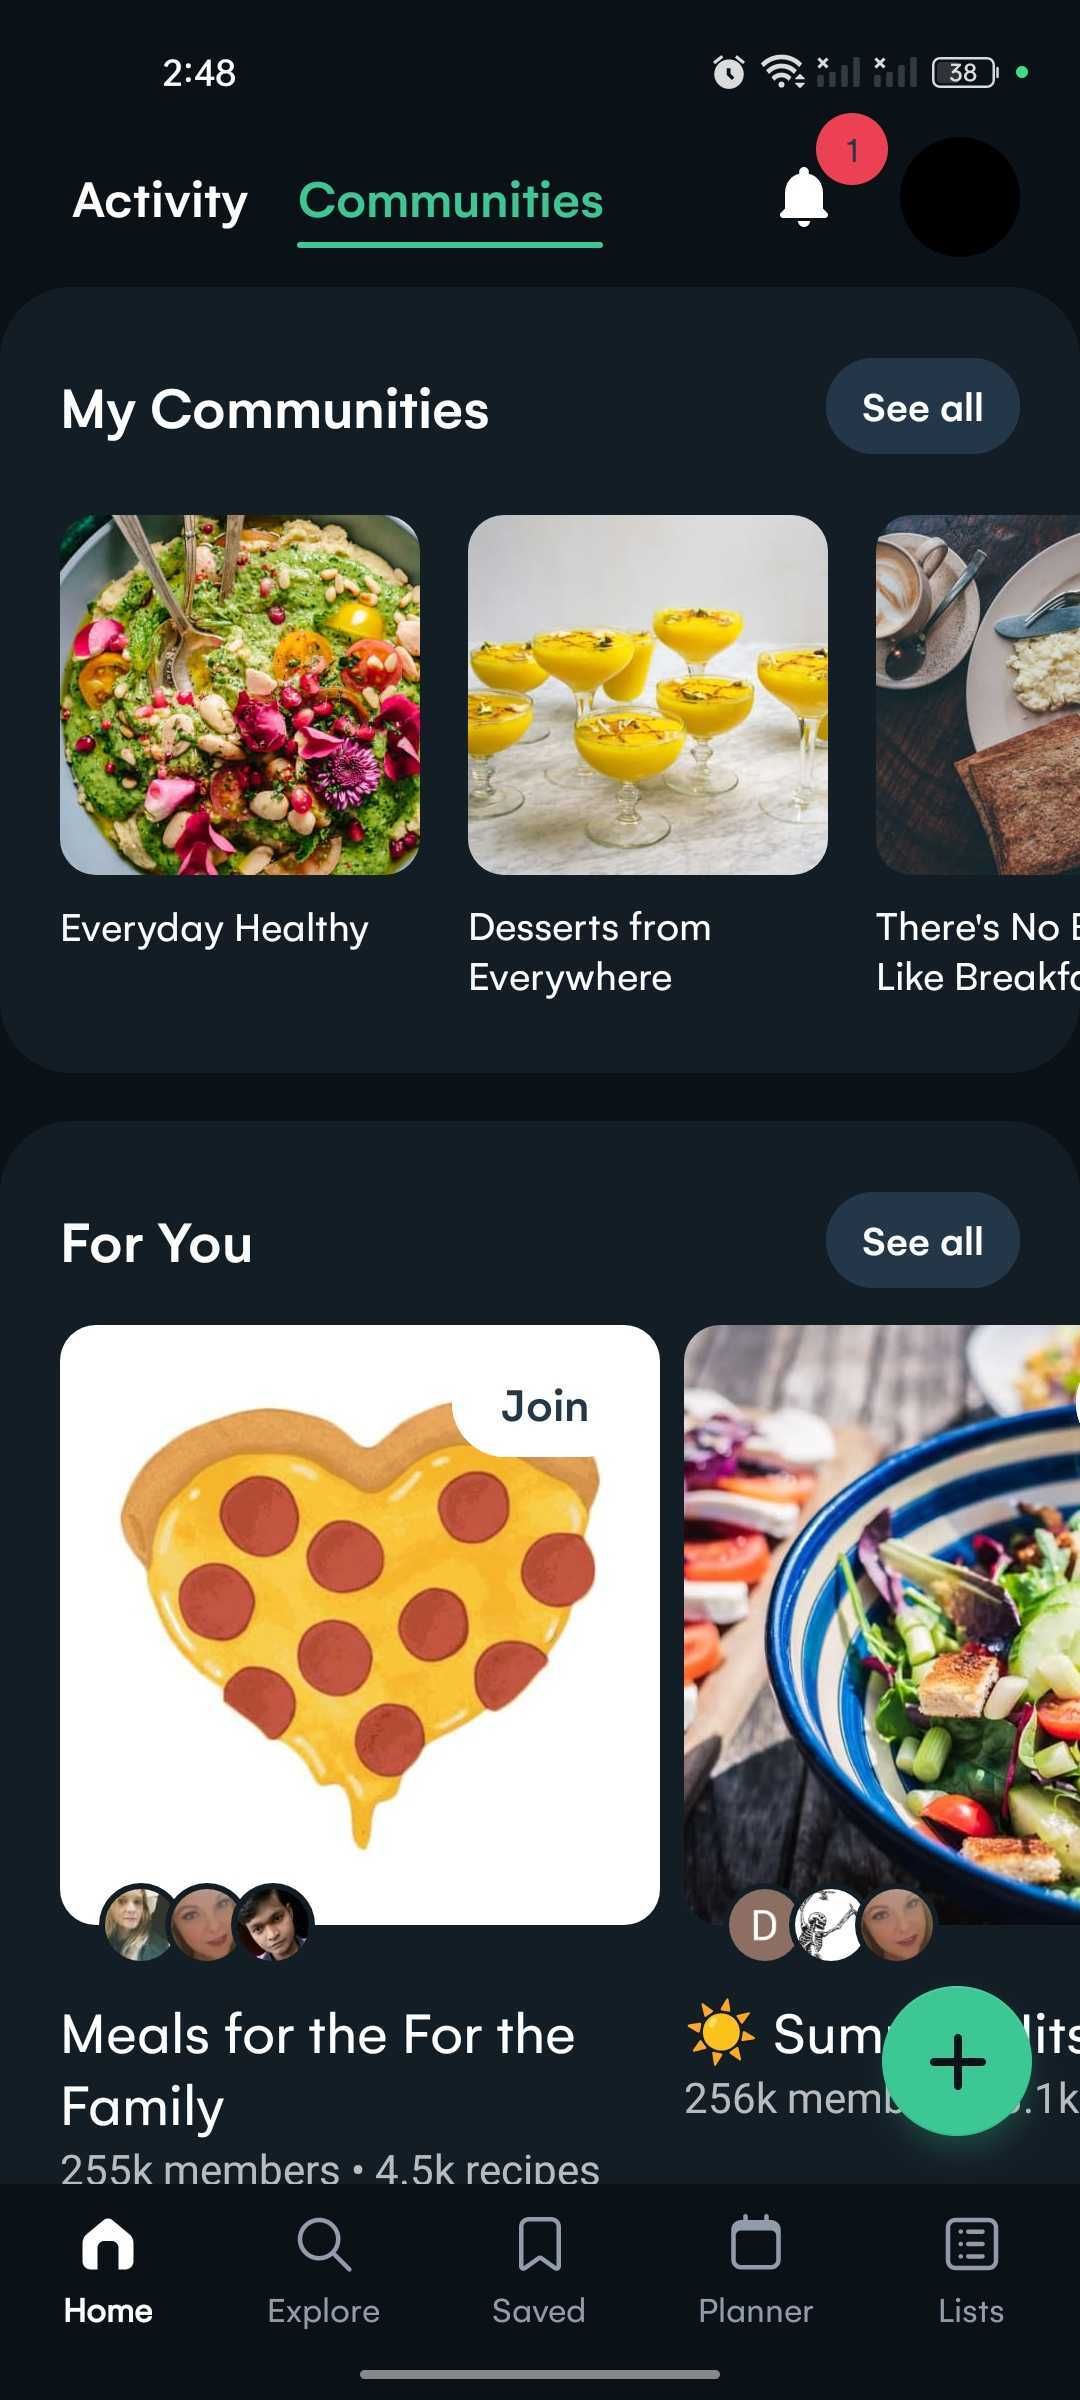 Communities in the Whisk app